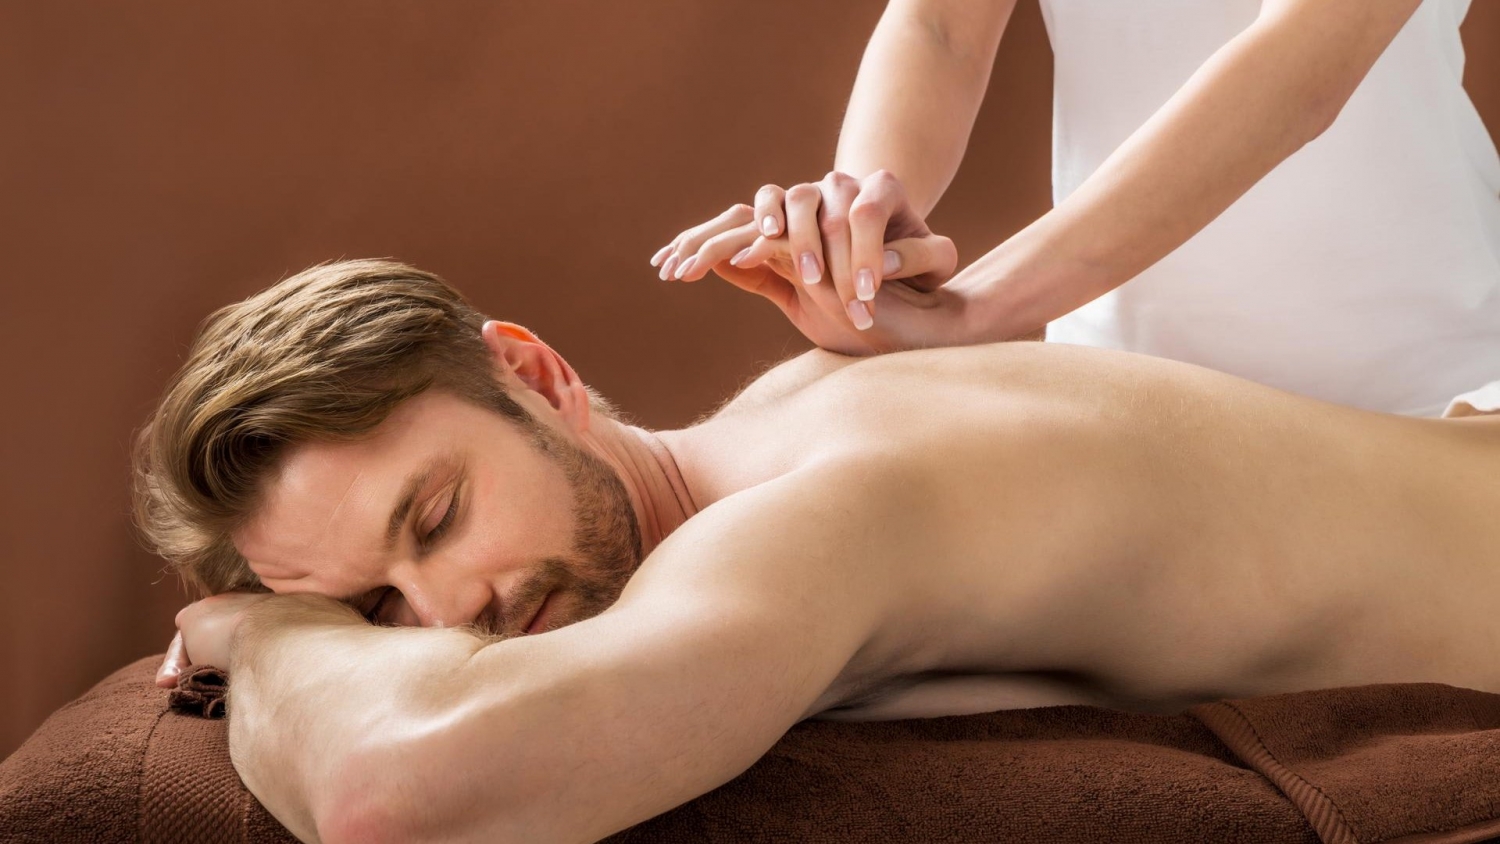 What does Greek massage mean?